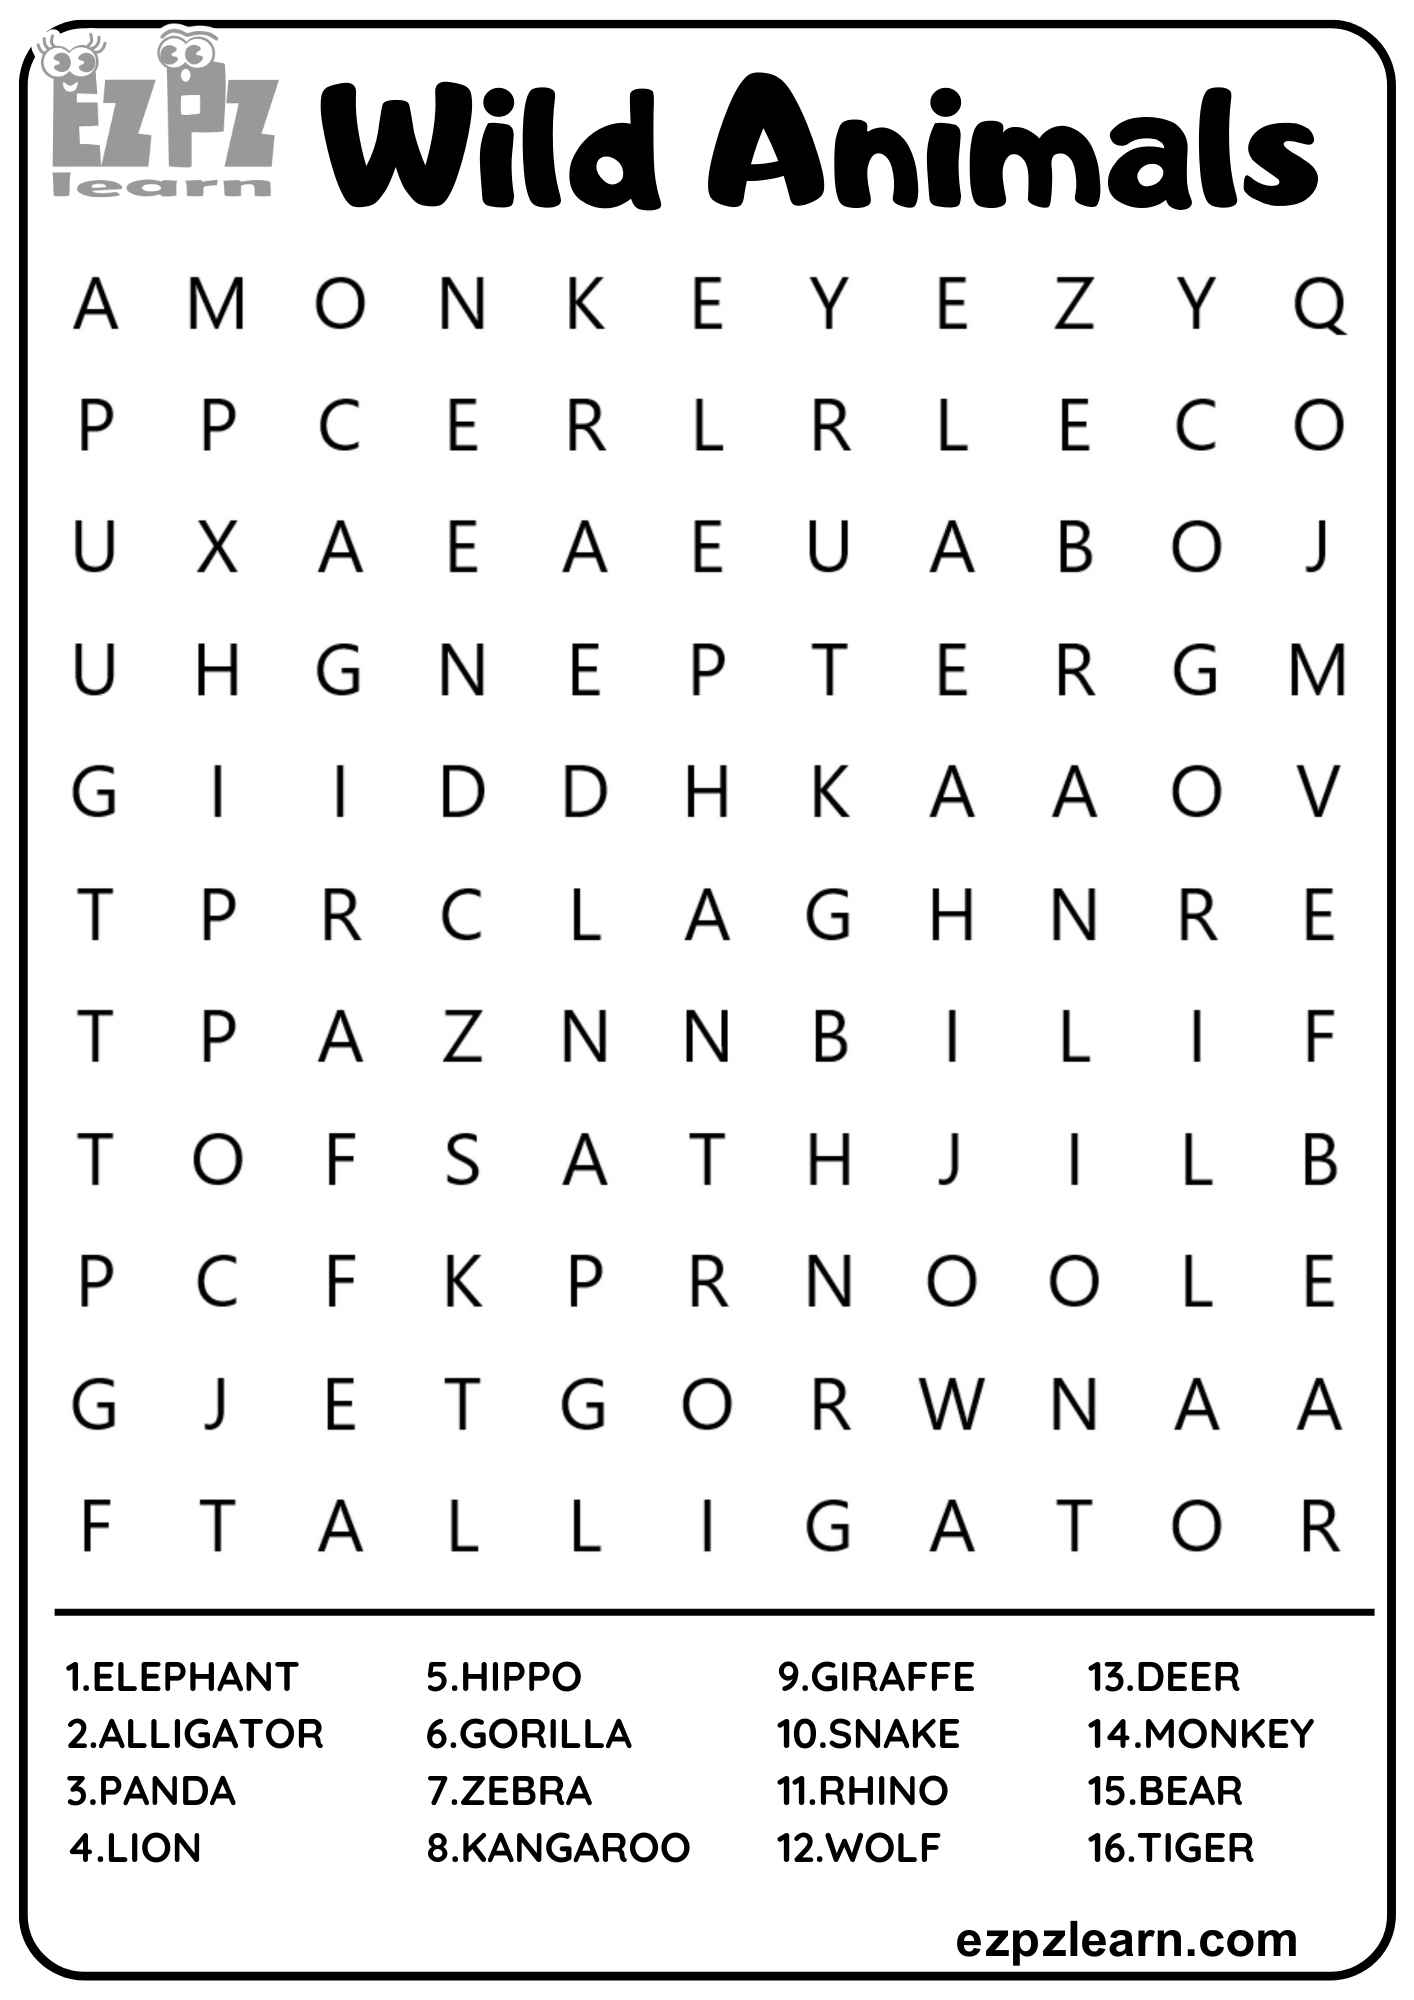 Wild Animals Vocabulary Word Search for Kids and English Language ...